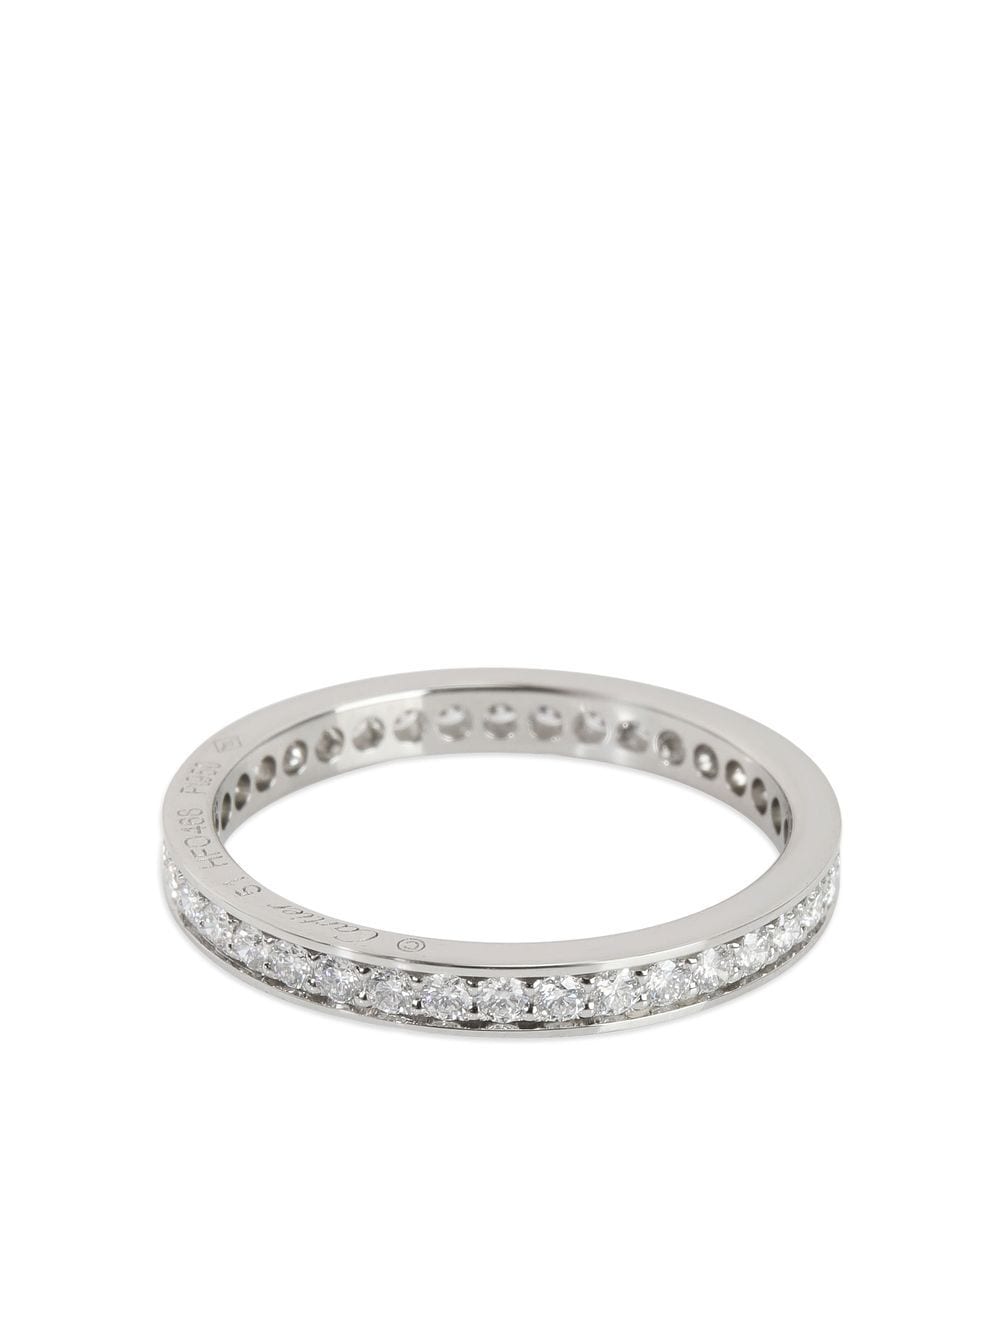 Cartier pre-owned platinum Ballerine diamond eternity band ring - Silver